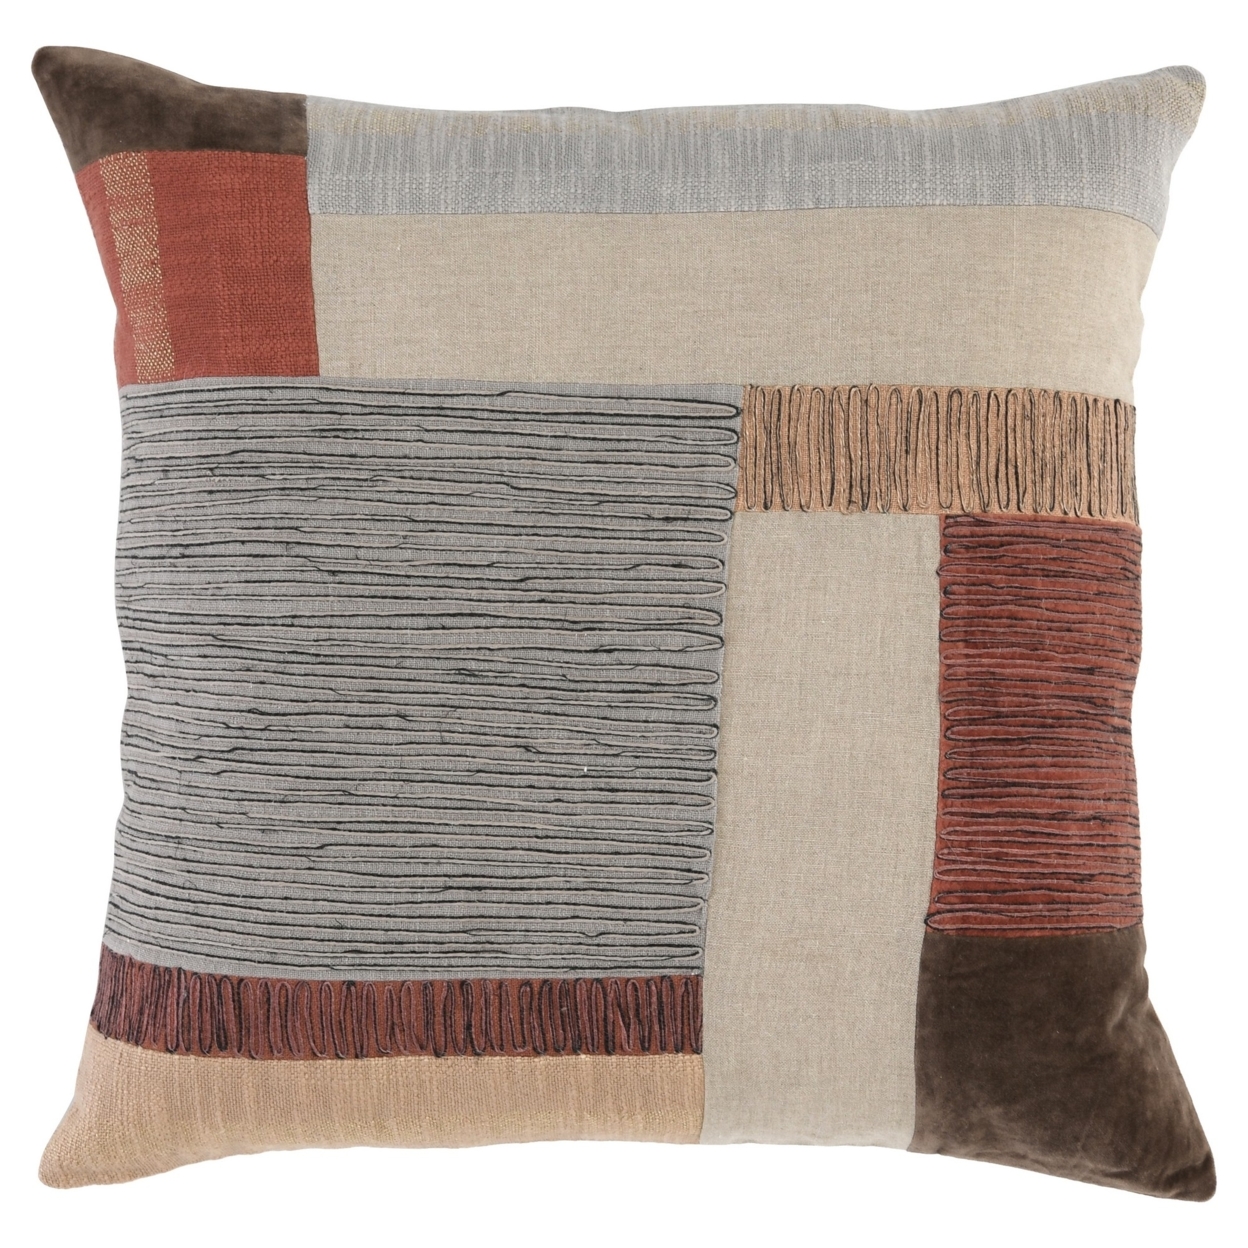 22 Inch Square Accent Throw Pillow, Modern Patchwork, Beige Multicolor, Saltoro Sherpi